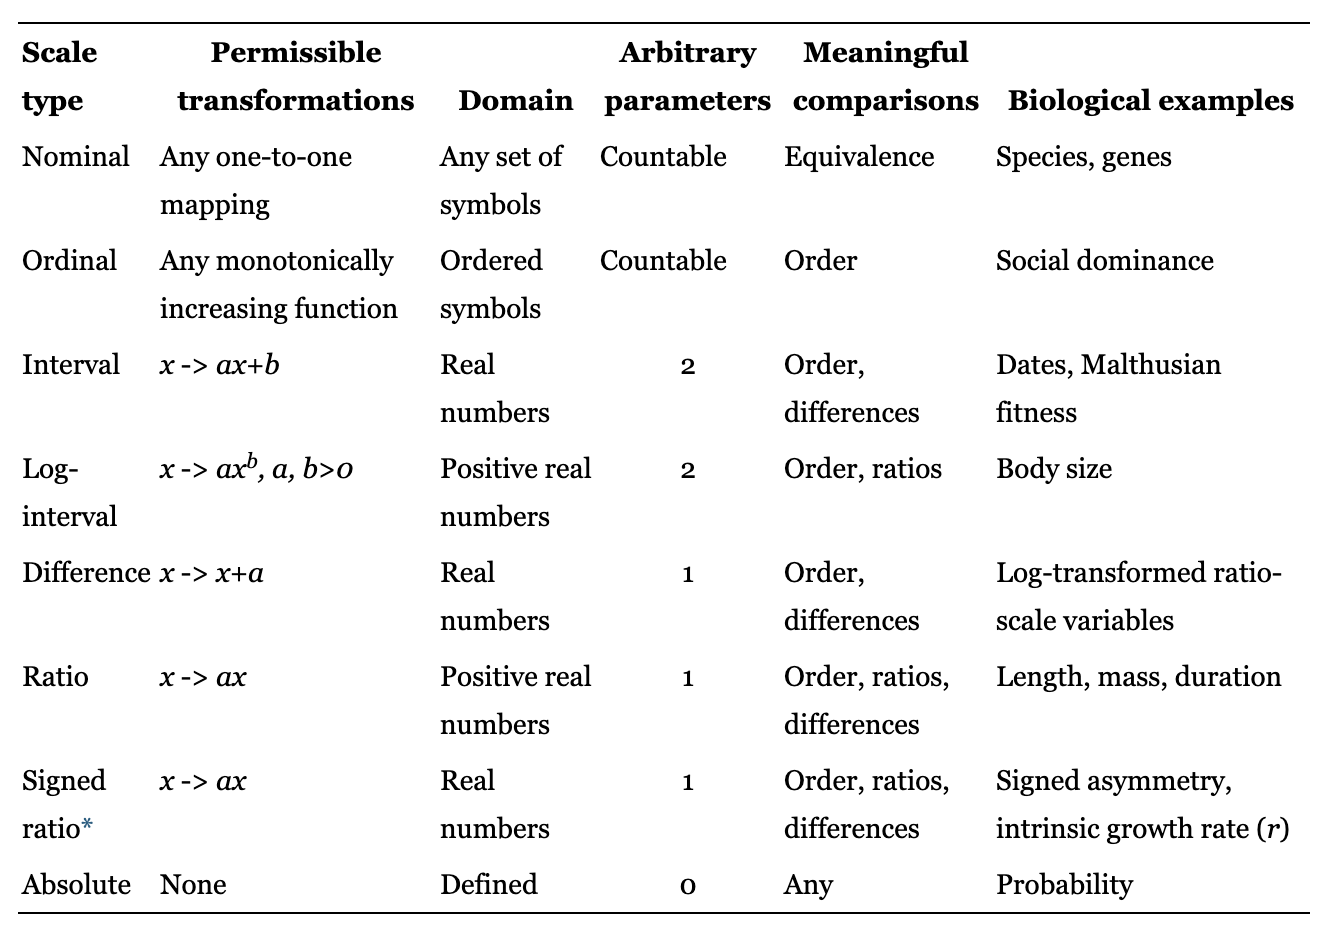 Scale types from measurement theory that are relevant to biology. Permissible transformations indicate the mathematical operations that can be performed on measurements of each scale type without distorting their meaning. The Domain indicates the state space, *i.e.* range of possible values. Meaningful comparisons indicates comparisons that can be made between measurements of each scale type. Reproduced from Table 1 of Houle et al. (2011).